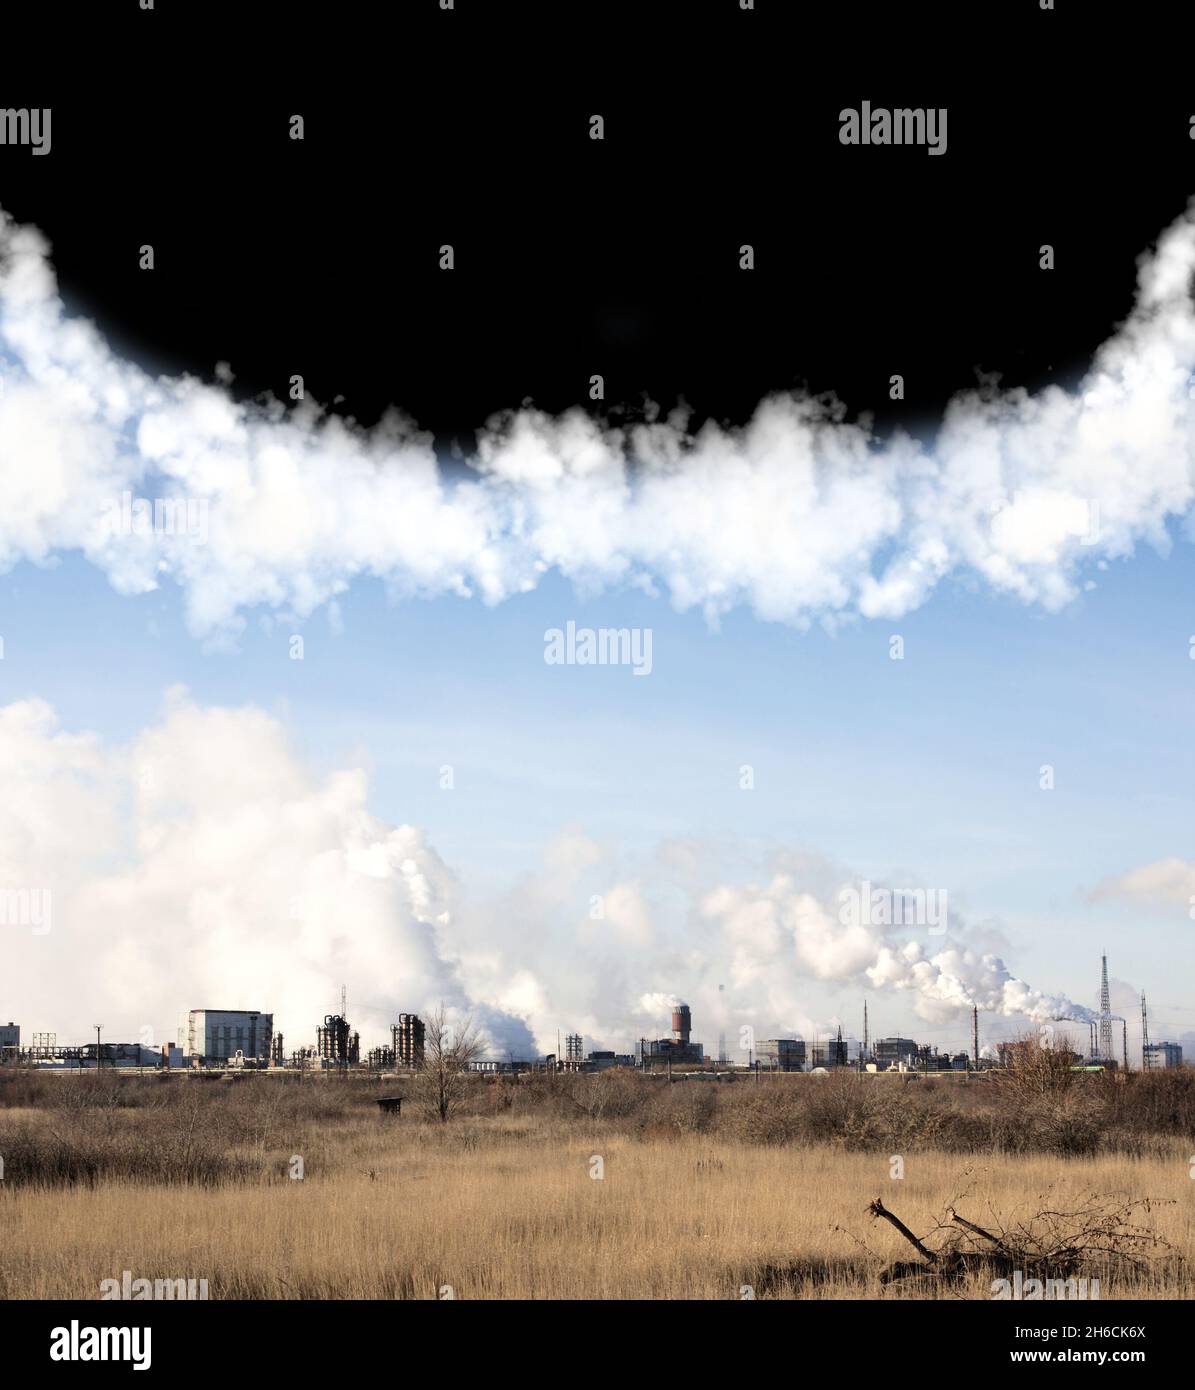 Air pollution smoke from factory pipes. Industrial smokestacks. Smoke from factory chimneys and blue and dark sky. Environmental pollution. Waste prod Stock Photo